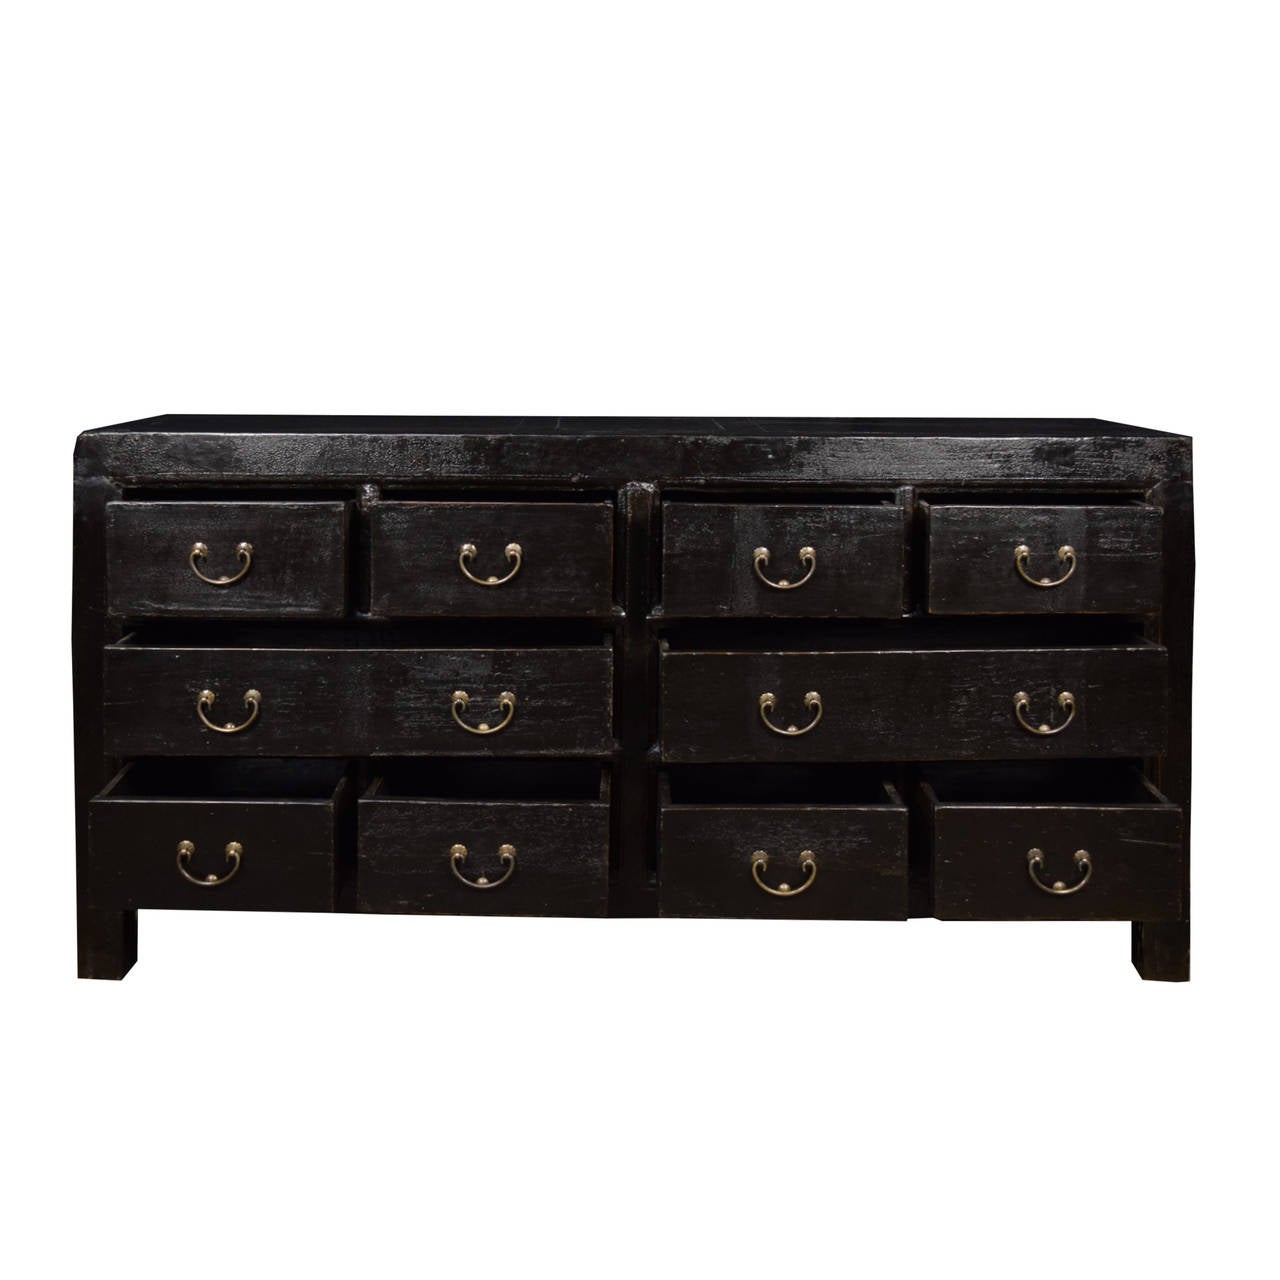 A ten drawer chest made of Chinese Northern Elmwood from Shanxi Province, China with brass hardware.

Pagoda Red Collection # DVEE015